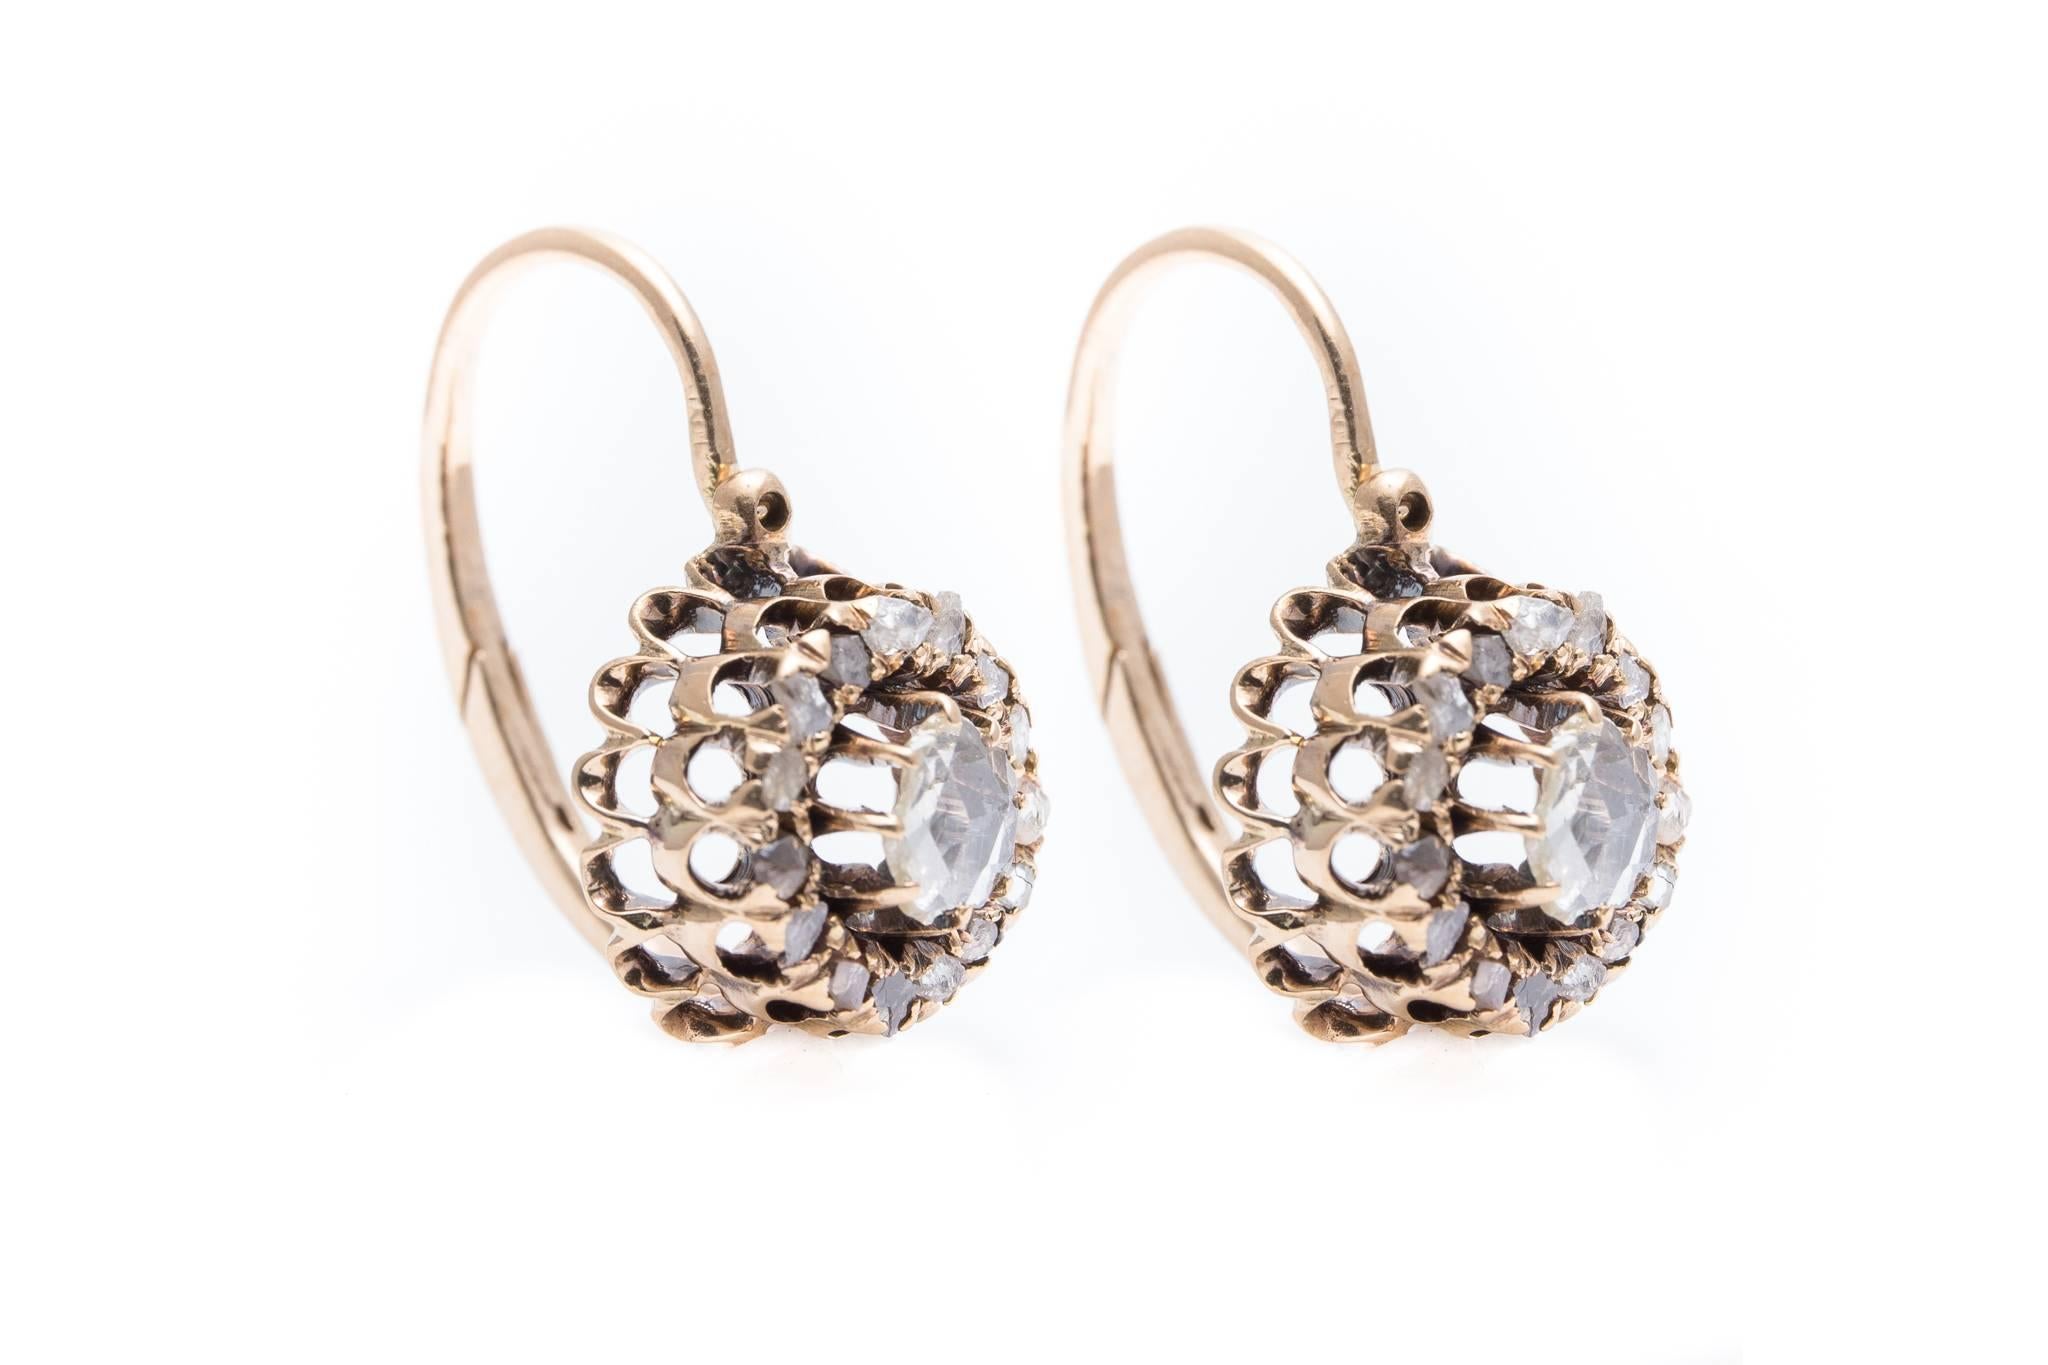 A superb pair of antique Georgian period diamond earrings in yellow gold. Featuring a center rose cut diamond surrounded by an outer halo of rose cut diamonds, these antique earrings are a fantastic and very rare example of original 18th century